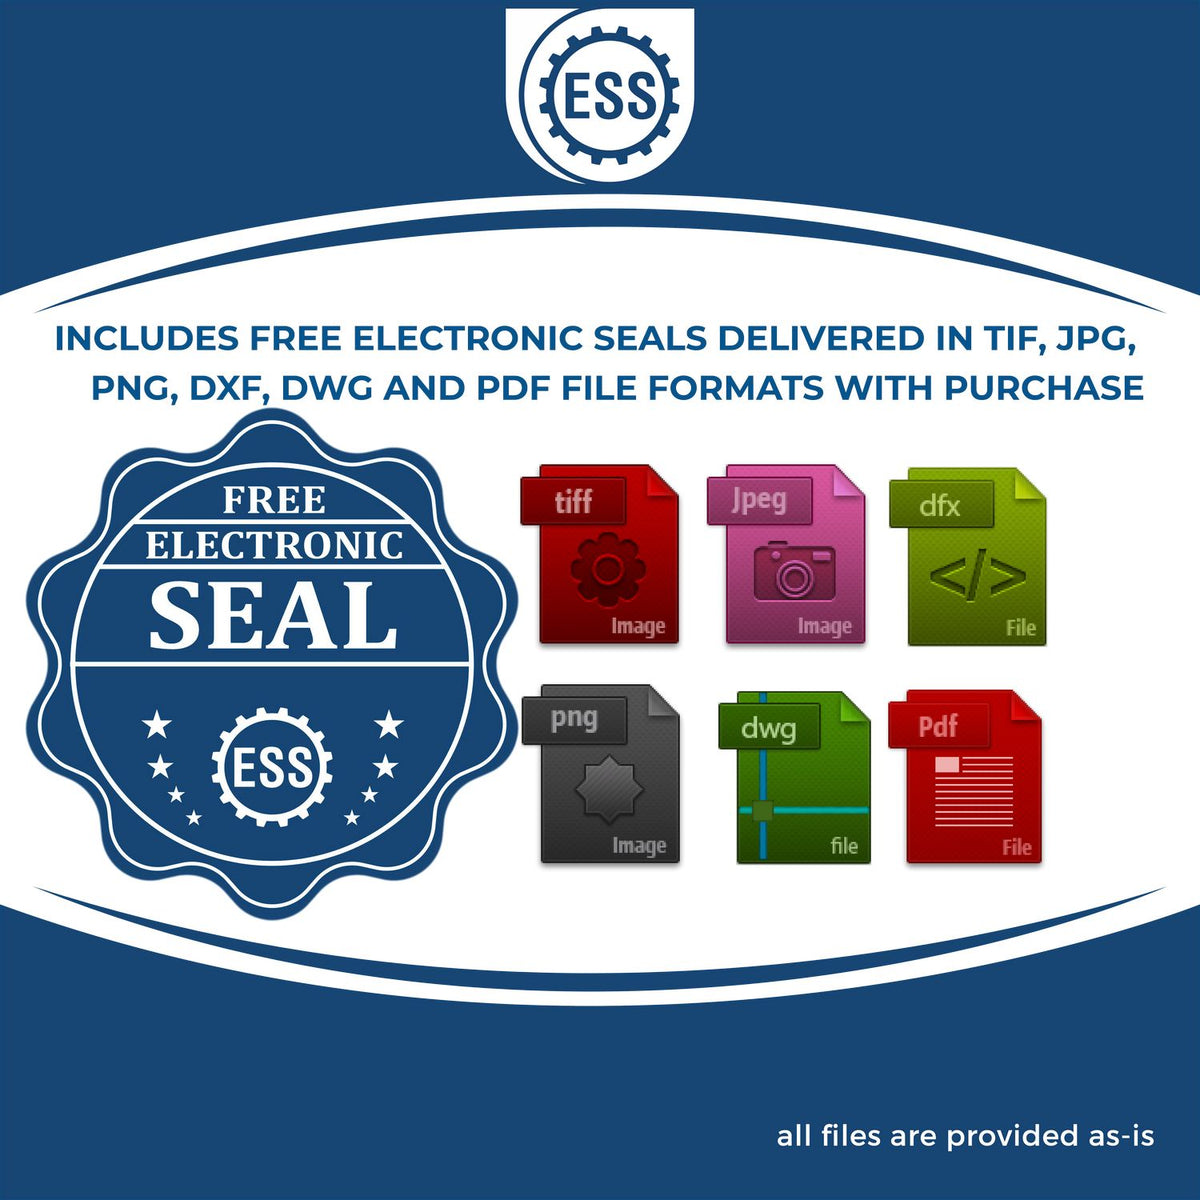 An infographic for the free electronic seal for the Gift Iowa Land Surveyor Seal illustrating the different file type icons such as DXF, DWG, TIF, JPG and PNG.